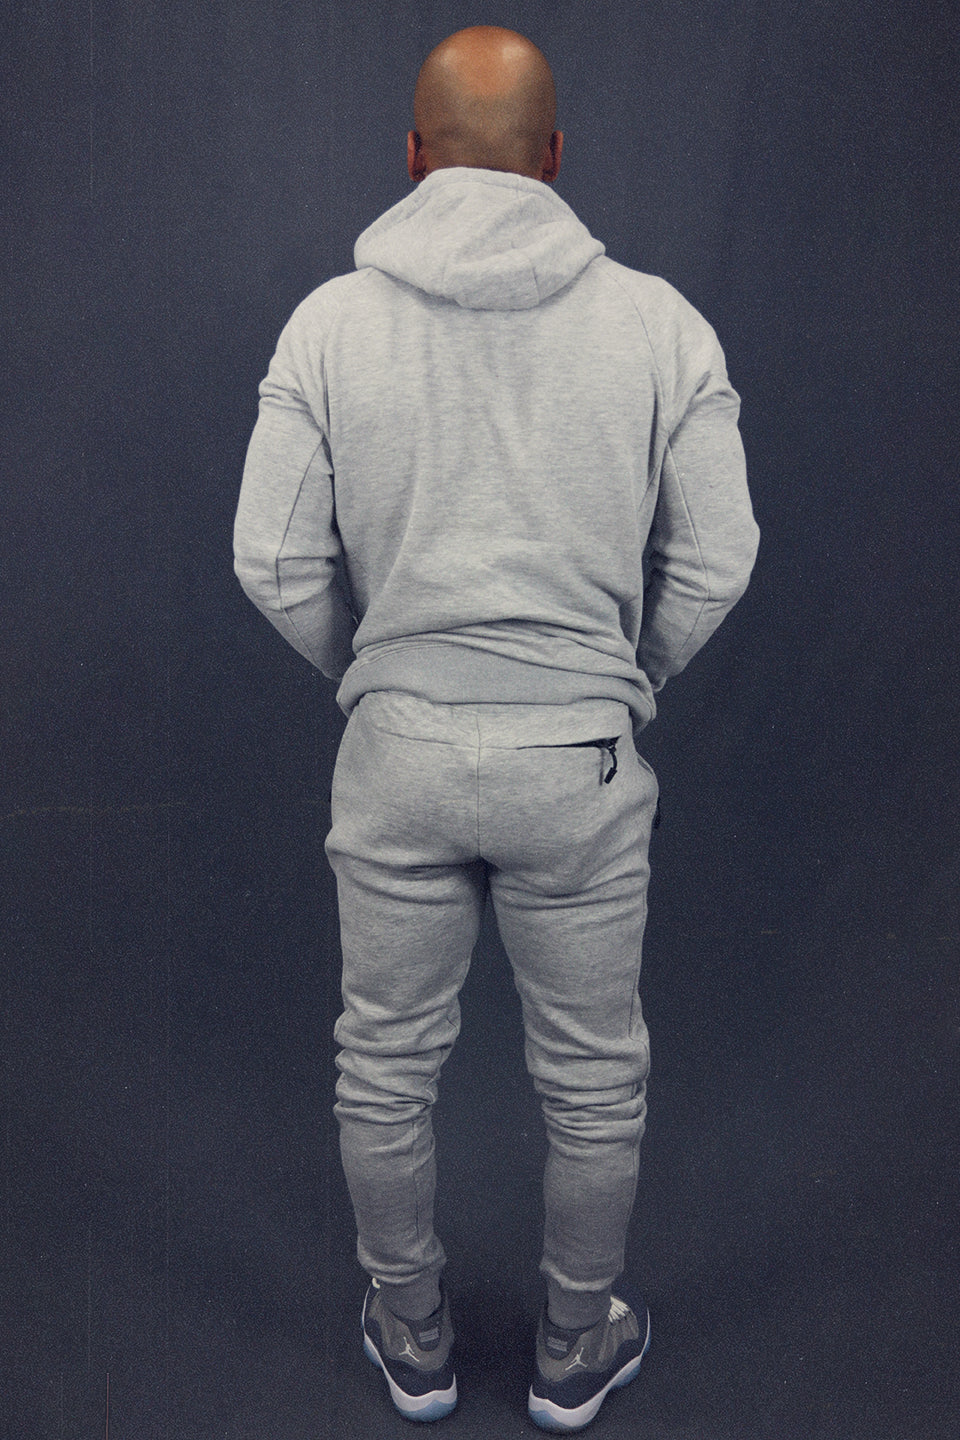 back view of the matching set Men's Heather Grey Fleece Sweatpants Jogger Pants Bottom To Match Sneakers